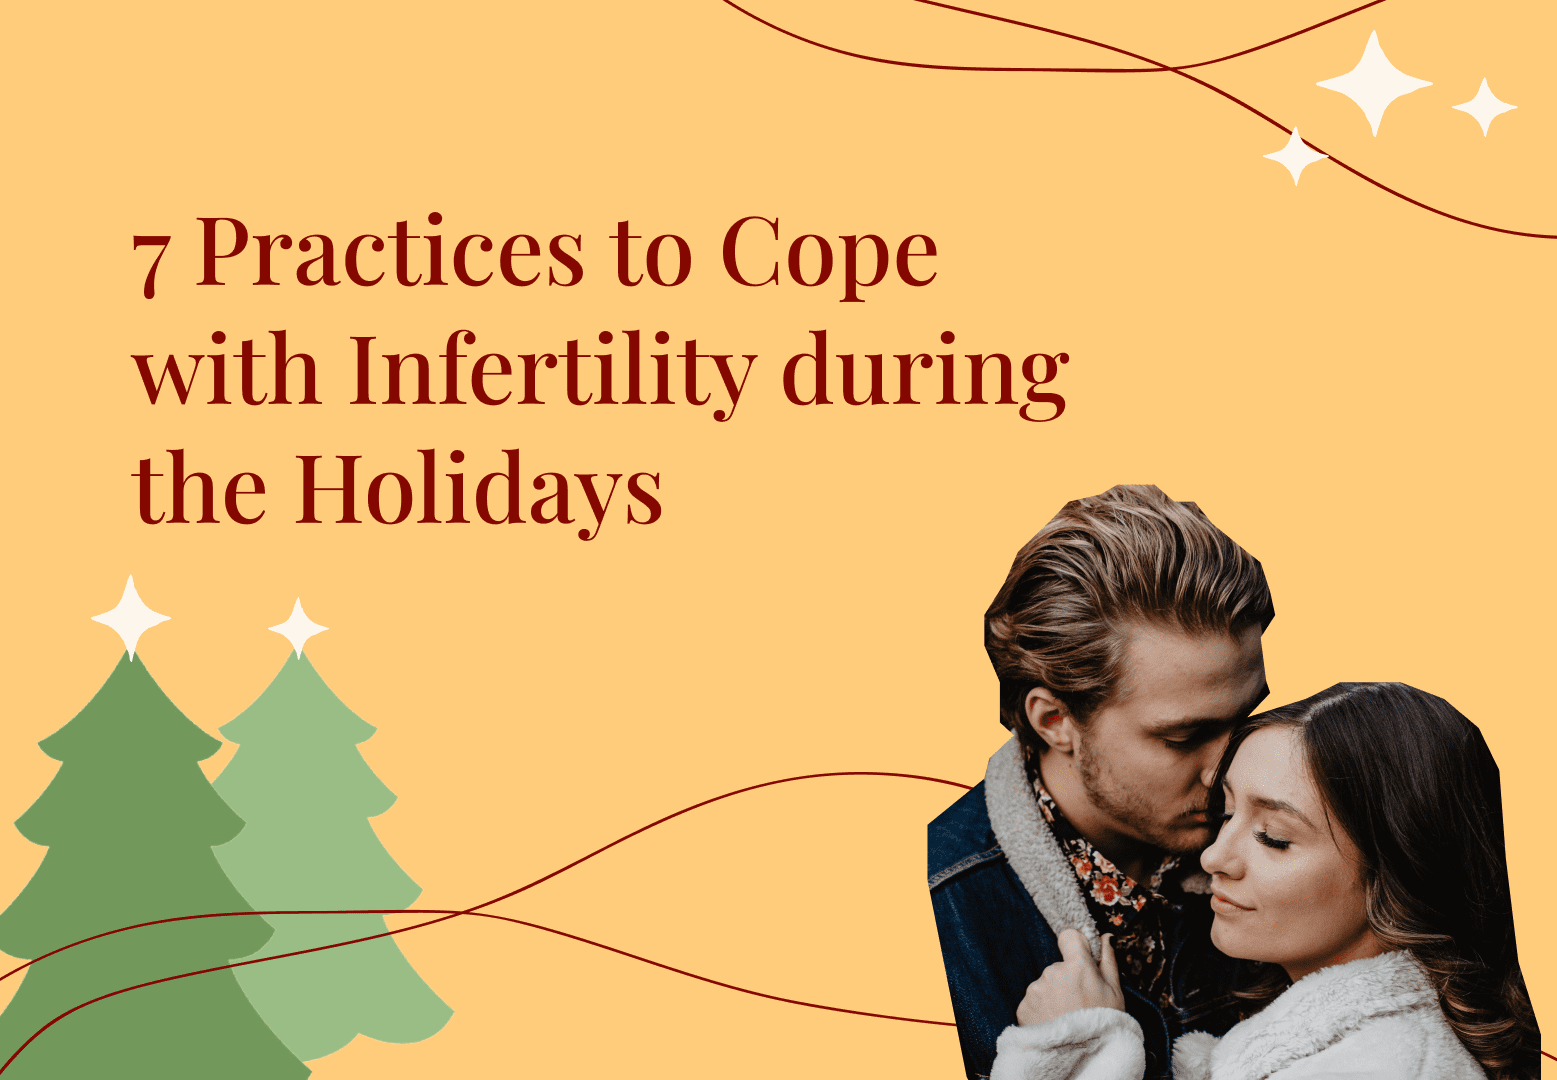 7 Practices to Cope with Infertility during the Holidays